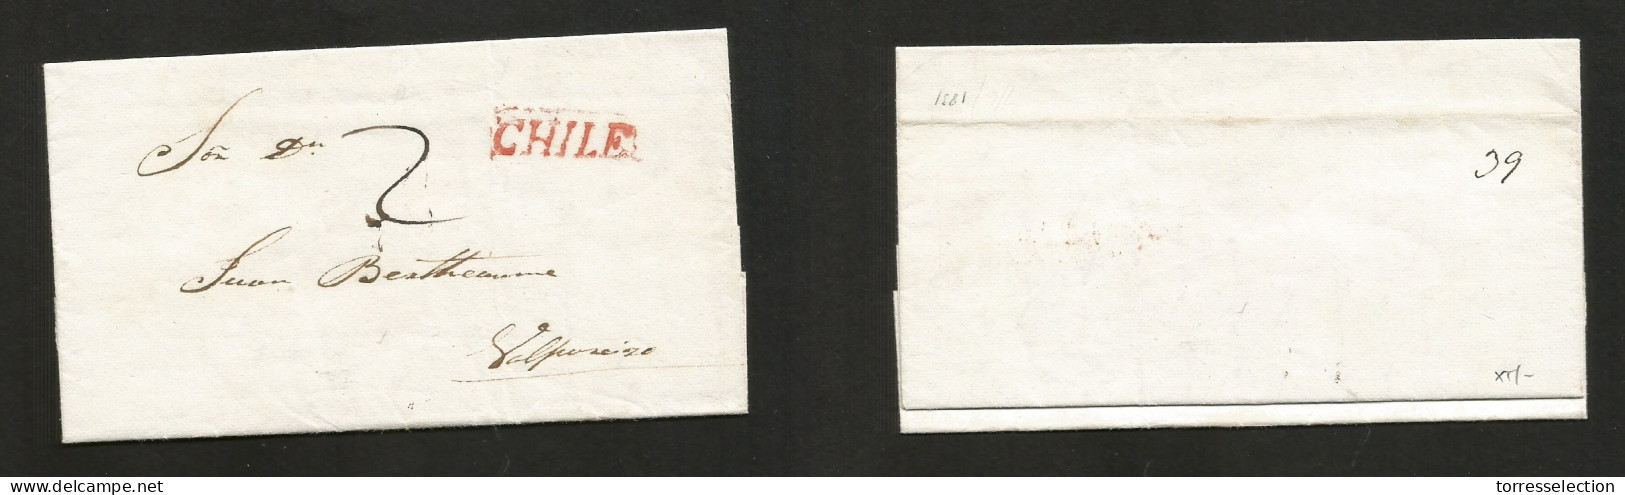 CHILE. 1831 (7 June) Stgo - Valp. EL With Text, Stline Red CHILE + "2" Mns Charge. VF. SALE. - Chile